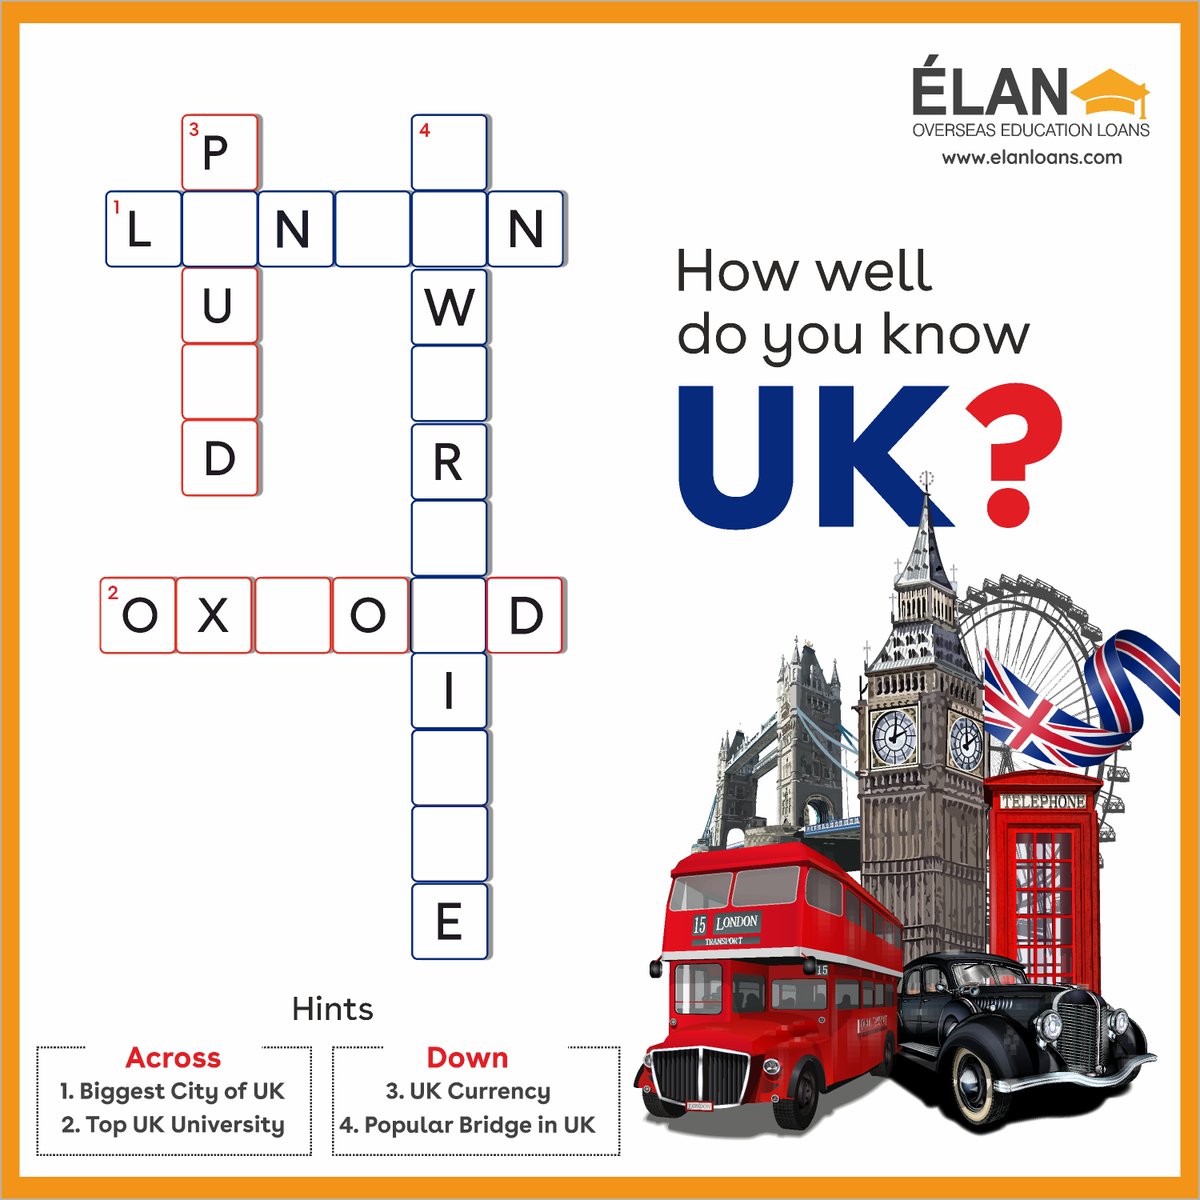 If UK is your study abroad destination, then solve this puzzle. Let us know the answers in the comment section below.
.
.
.
#uk #unitedkingdom #studyinUK #studyinuk2022 #studyabroaduk #ukeducation #ukeducationabroad #puzzlechallenge #Puzzle ÉLAN - Overseas Education Loans